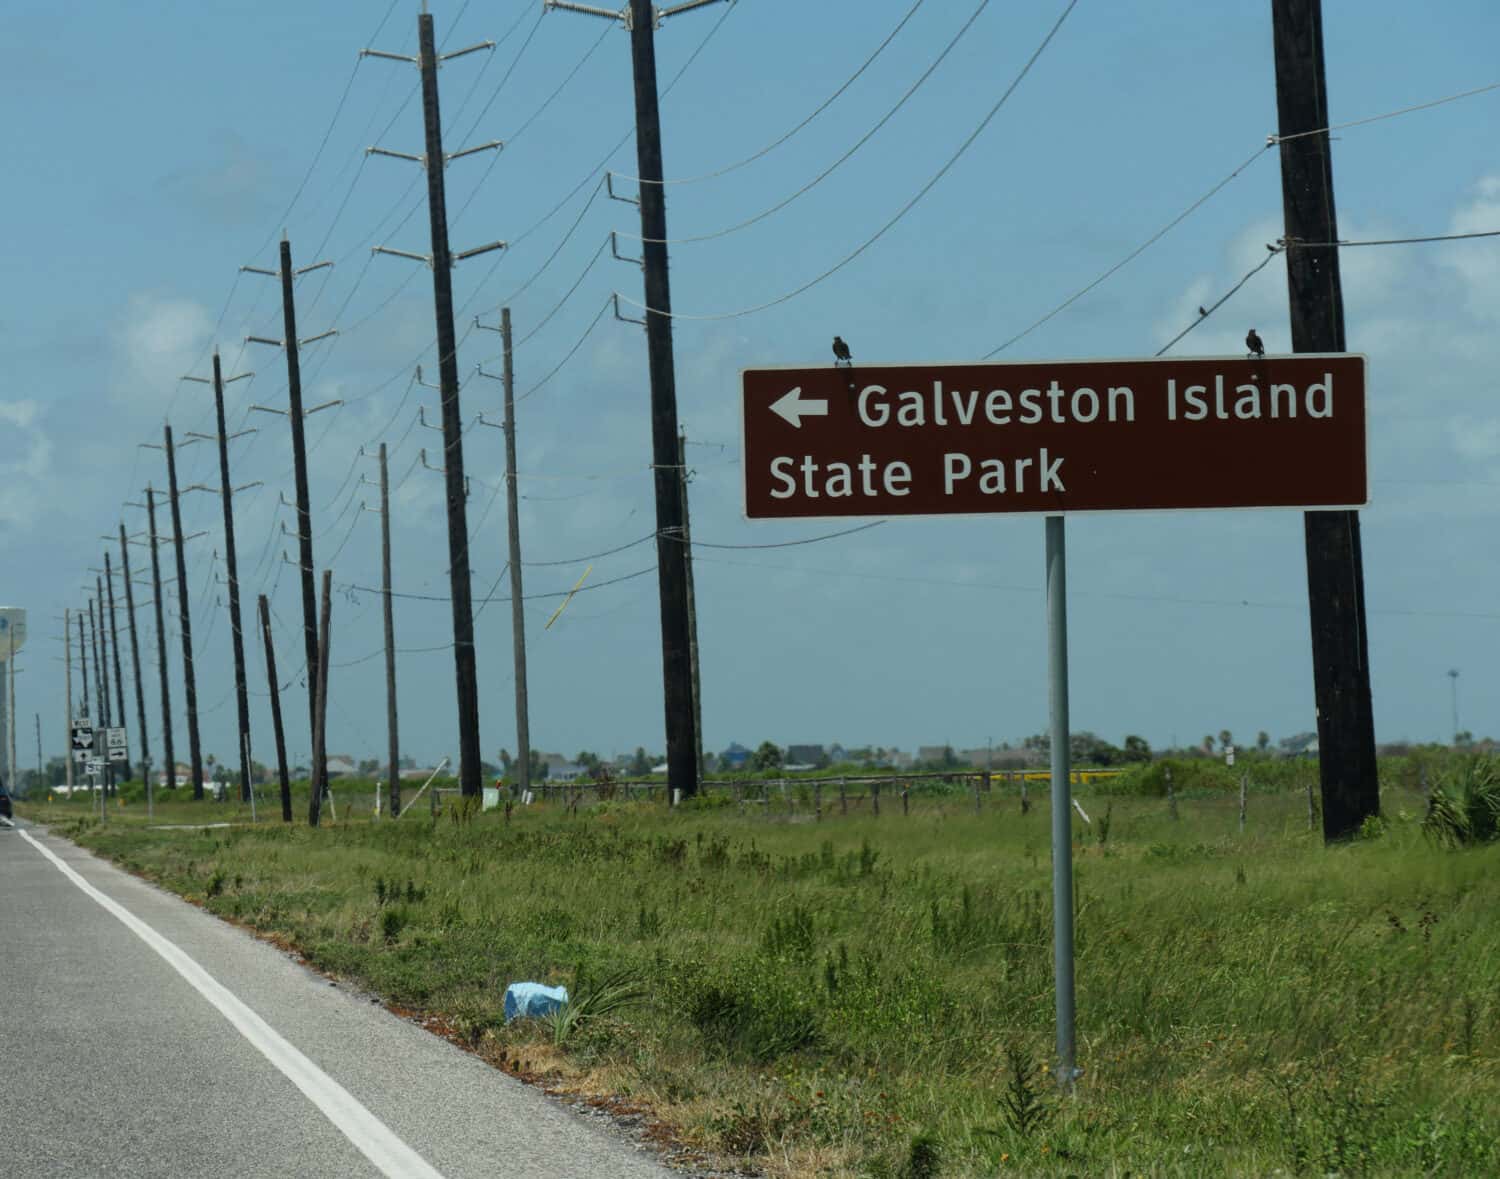 Roadside sign with direction to Galveston Island State Park with rows of power poles in the background